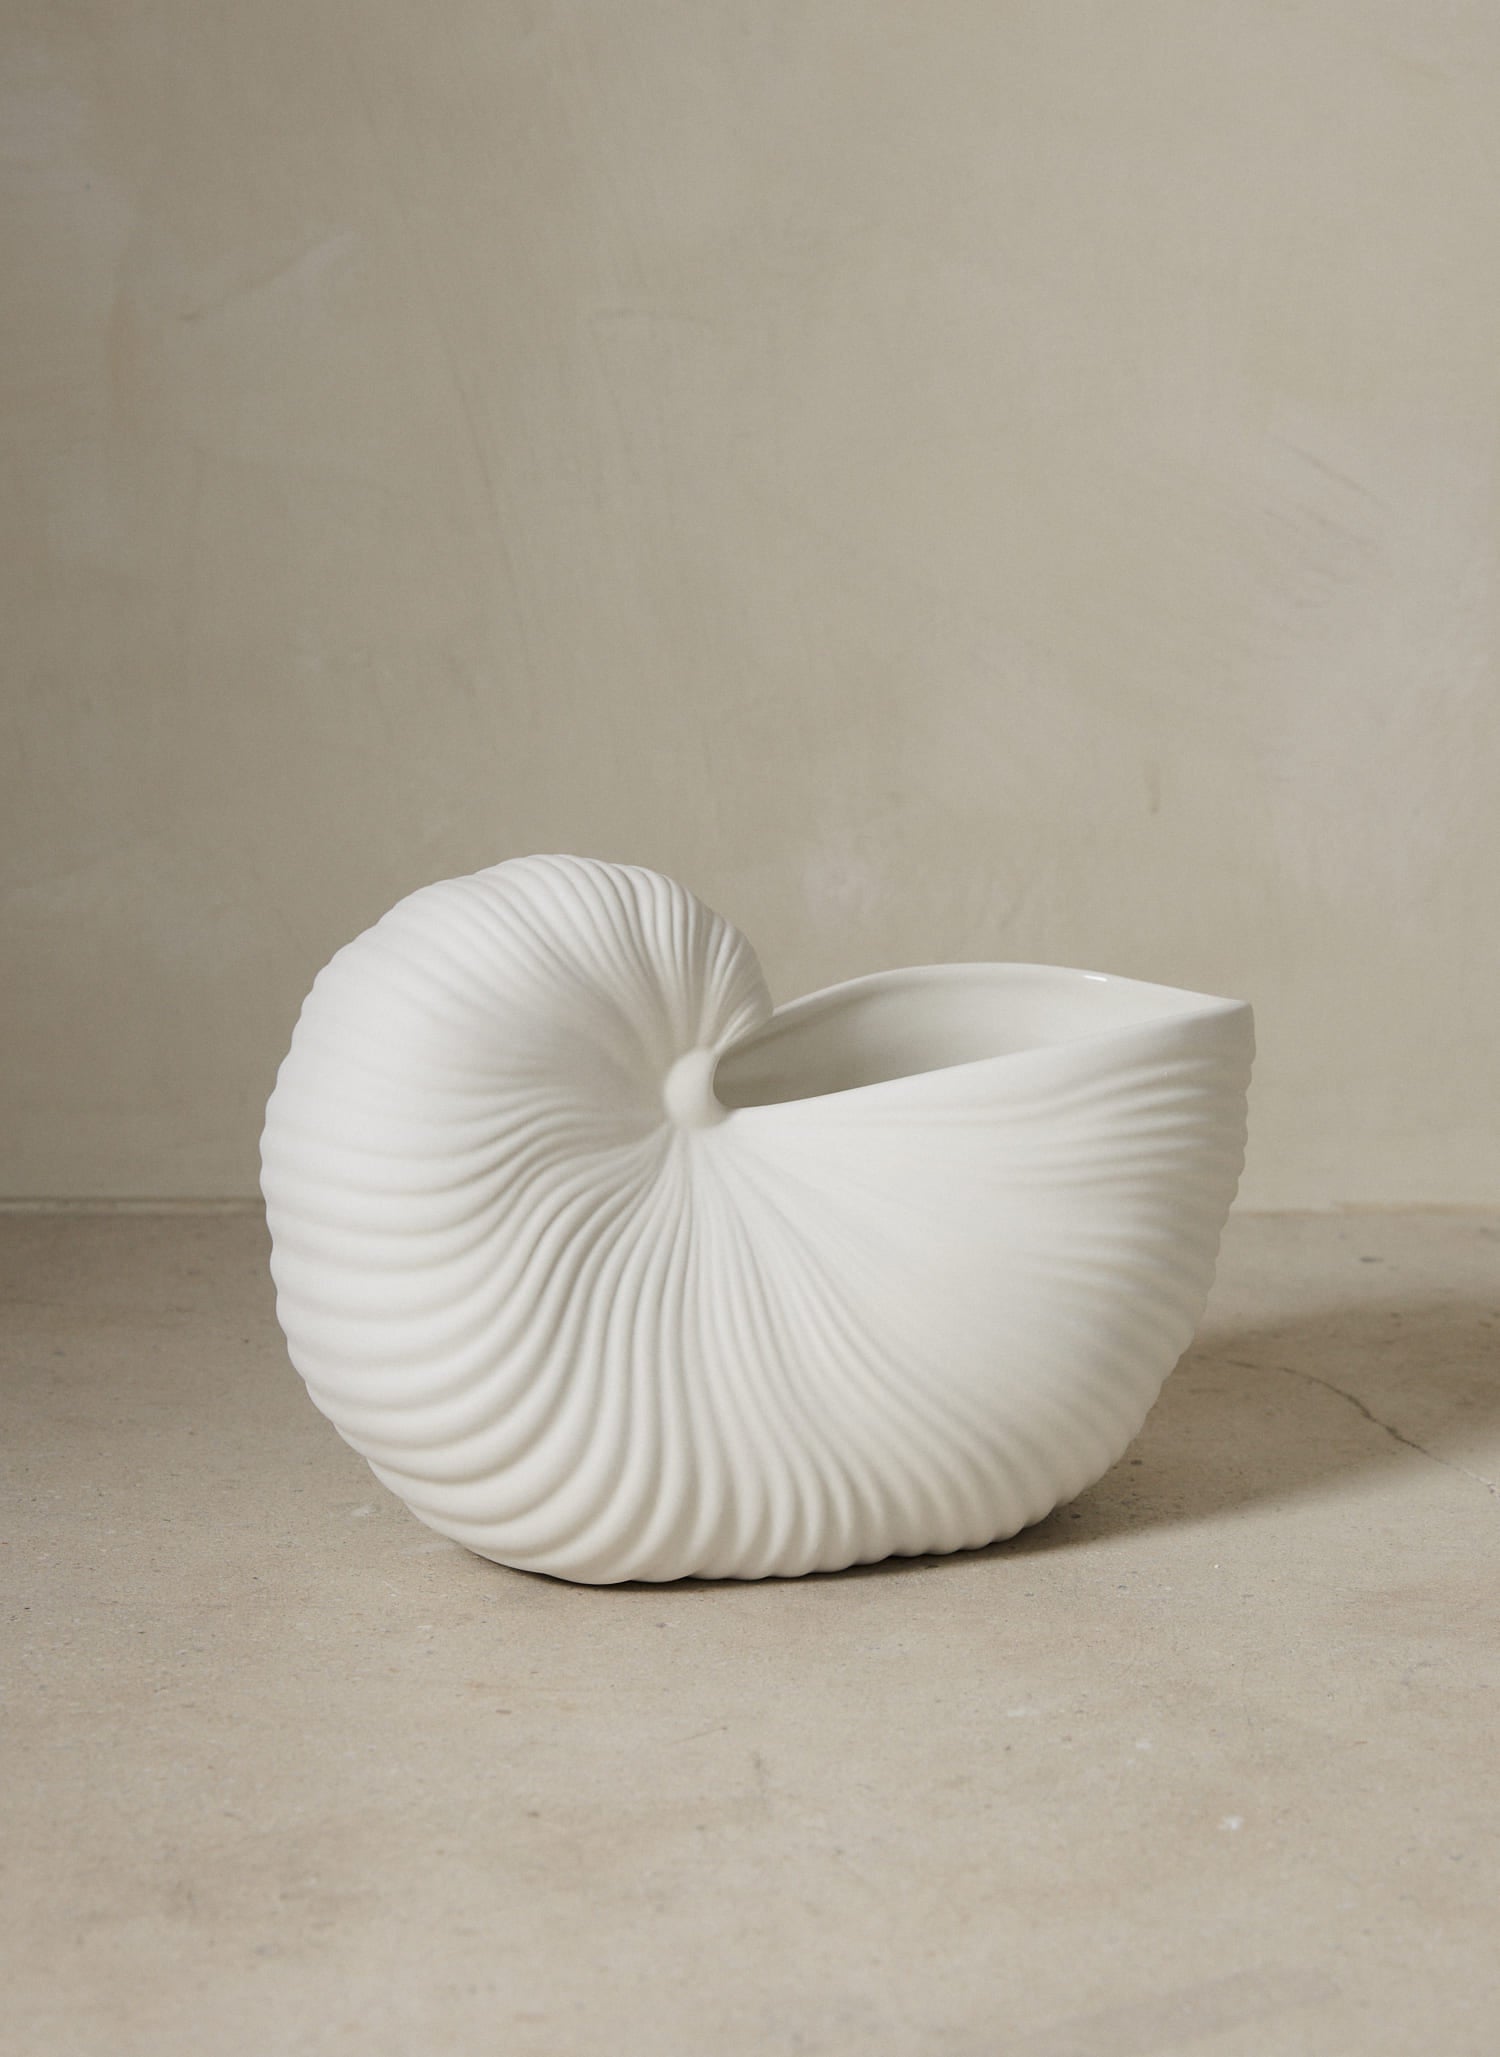 Shell Pot. A distinctive decorative vessel in a shell form reminiscent of the sea. 